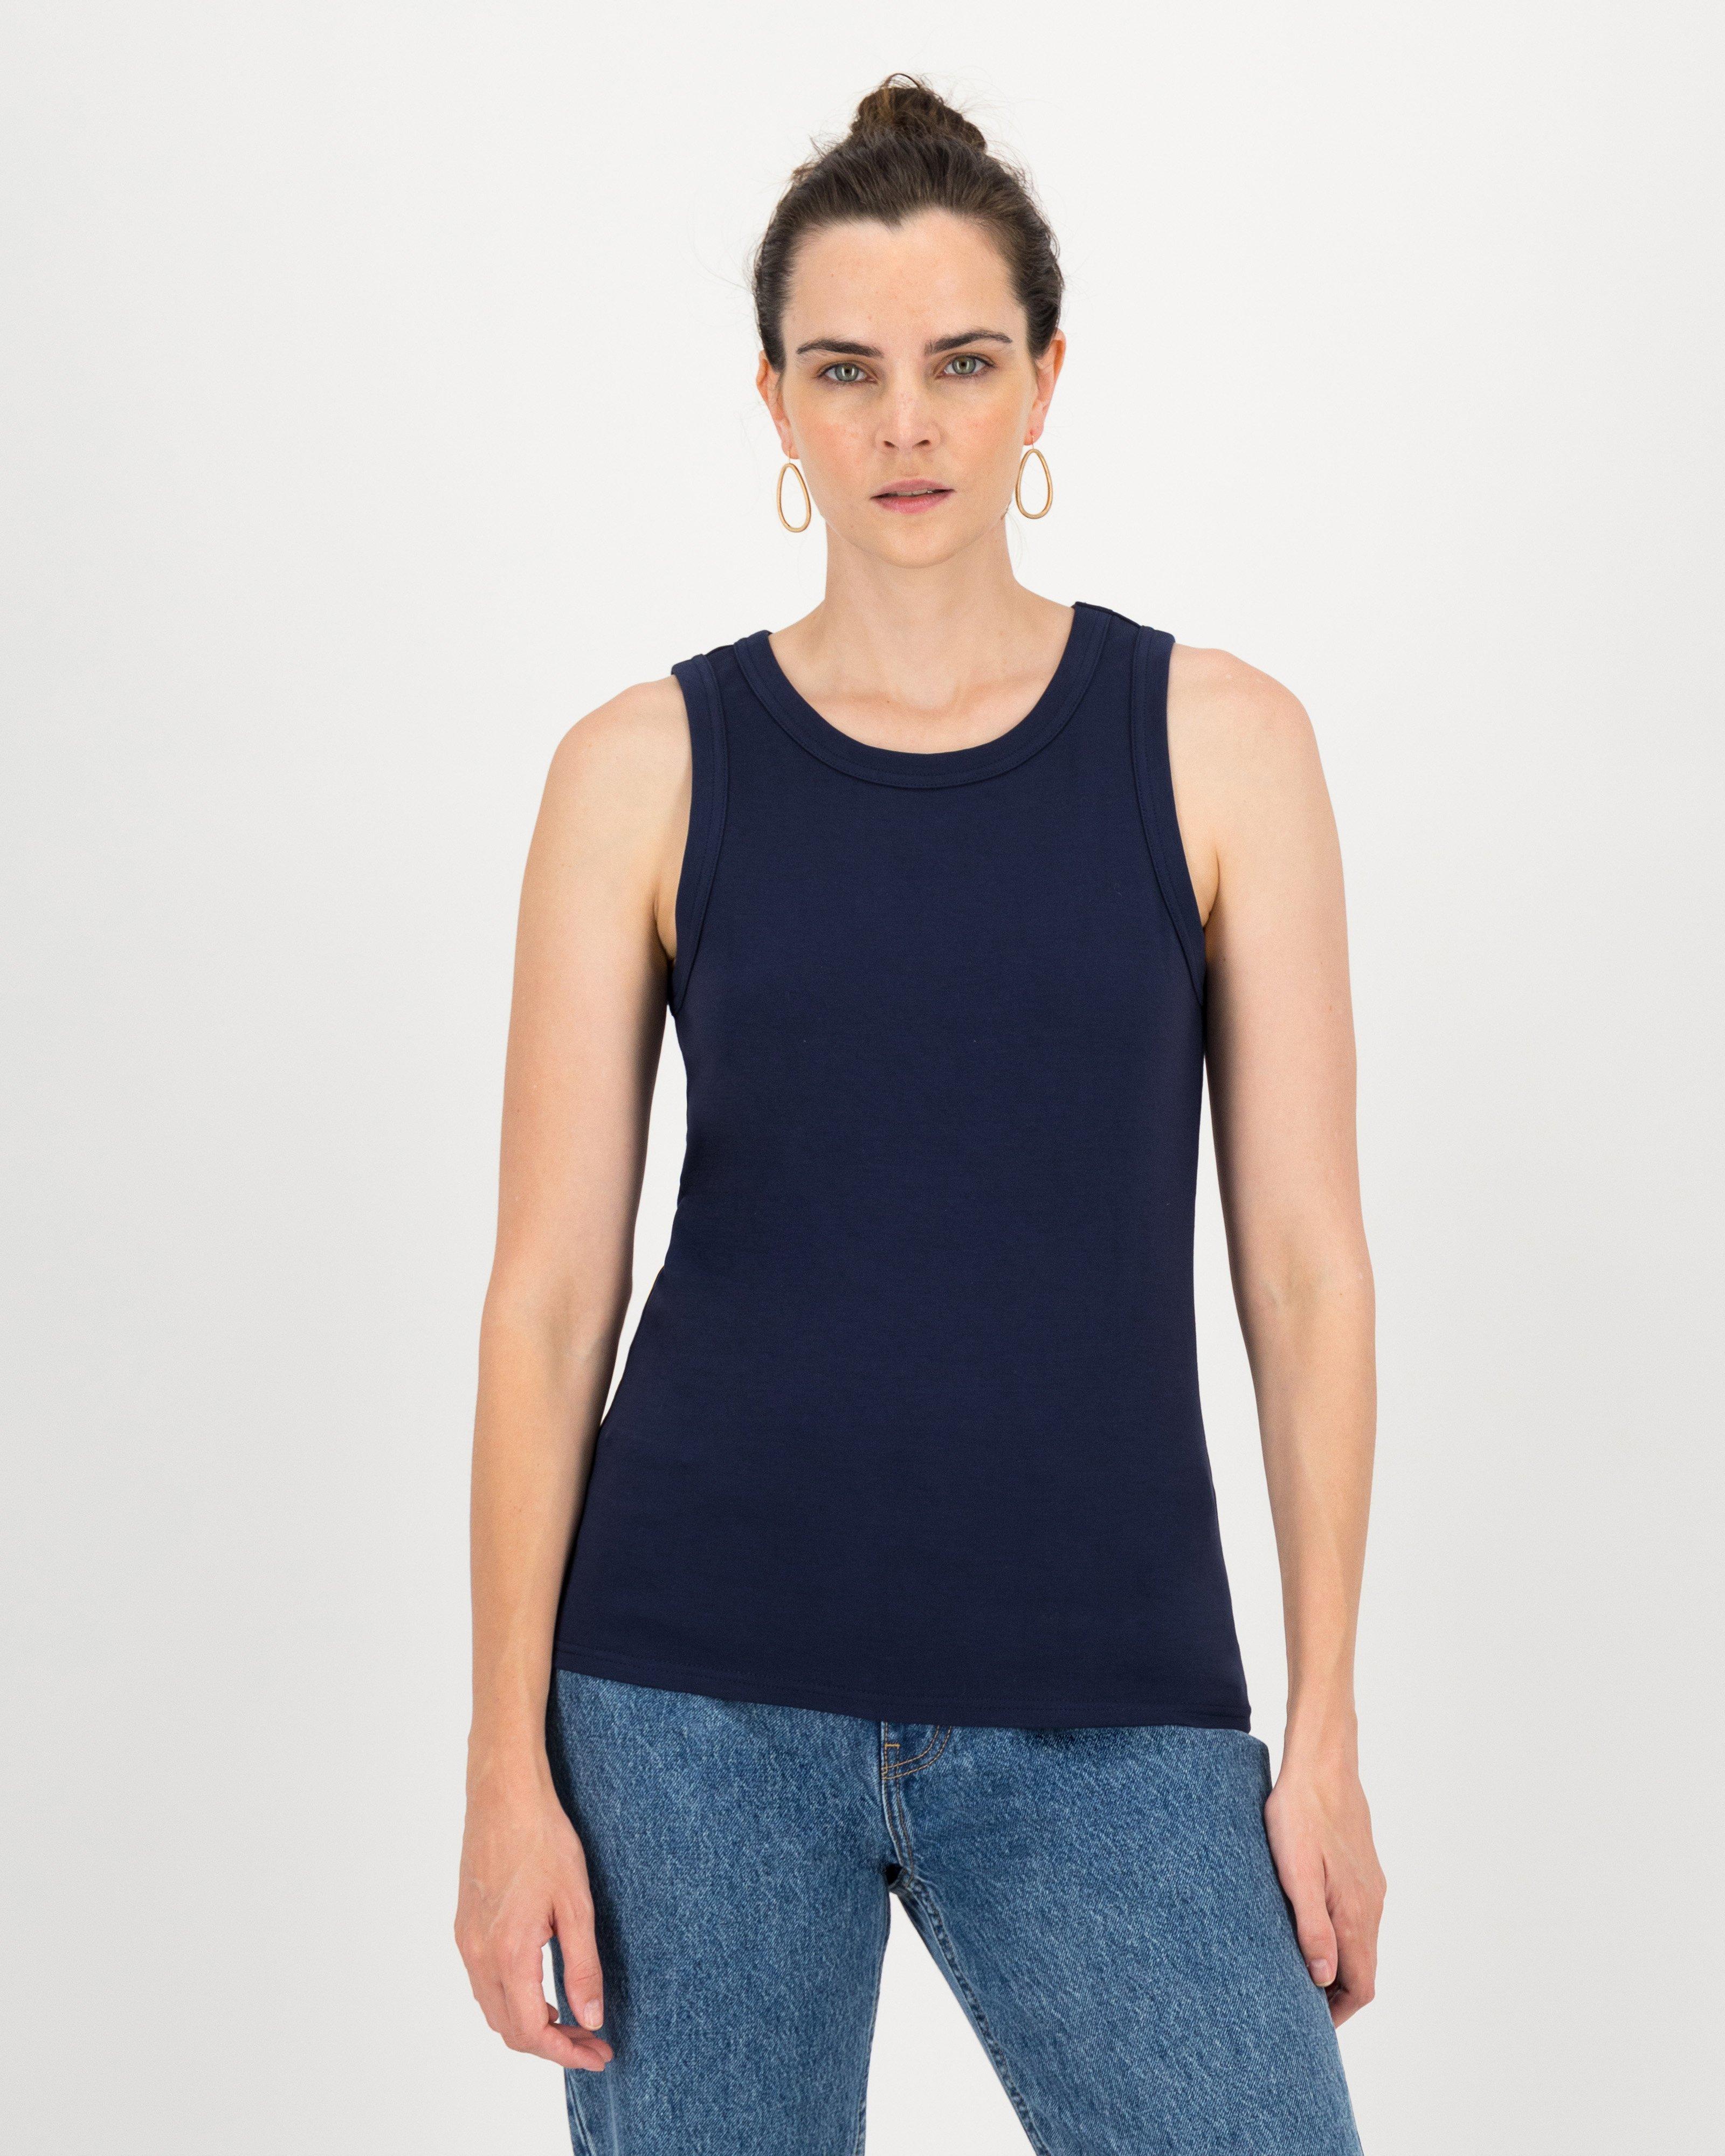 Caryn Tank Top - Poetry Clothing Store